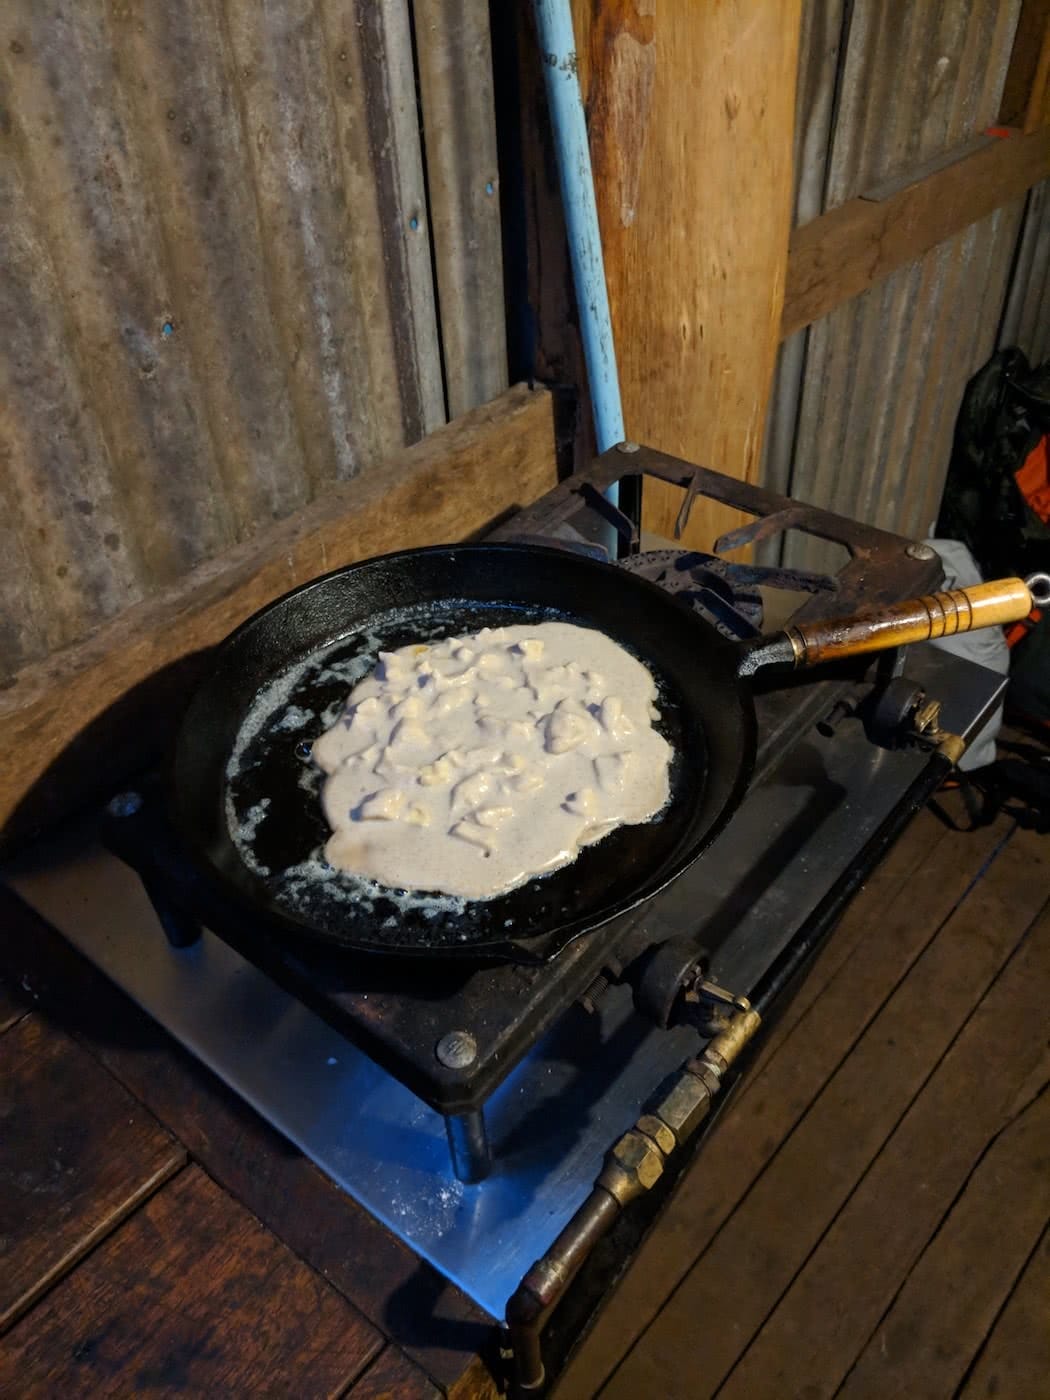 Apple And Cinnamon Pancakes // Camp Kitchen, Rachel Dimond, frying pan, cooking, food, gas stove, cast iron